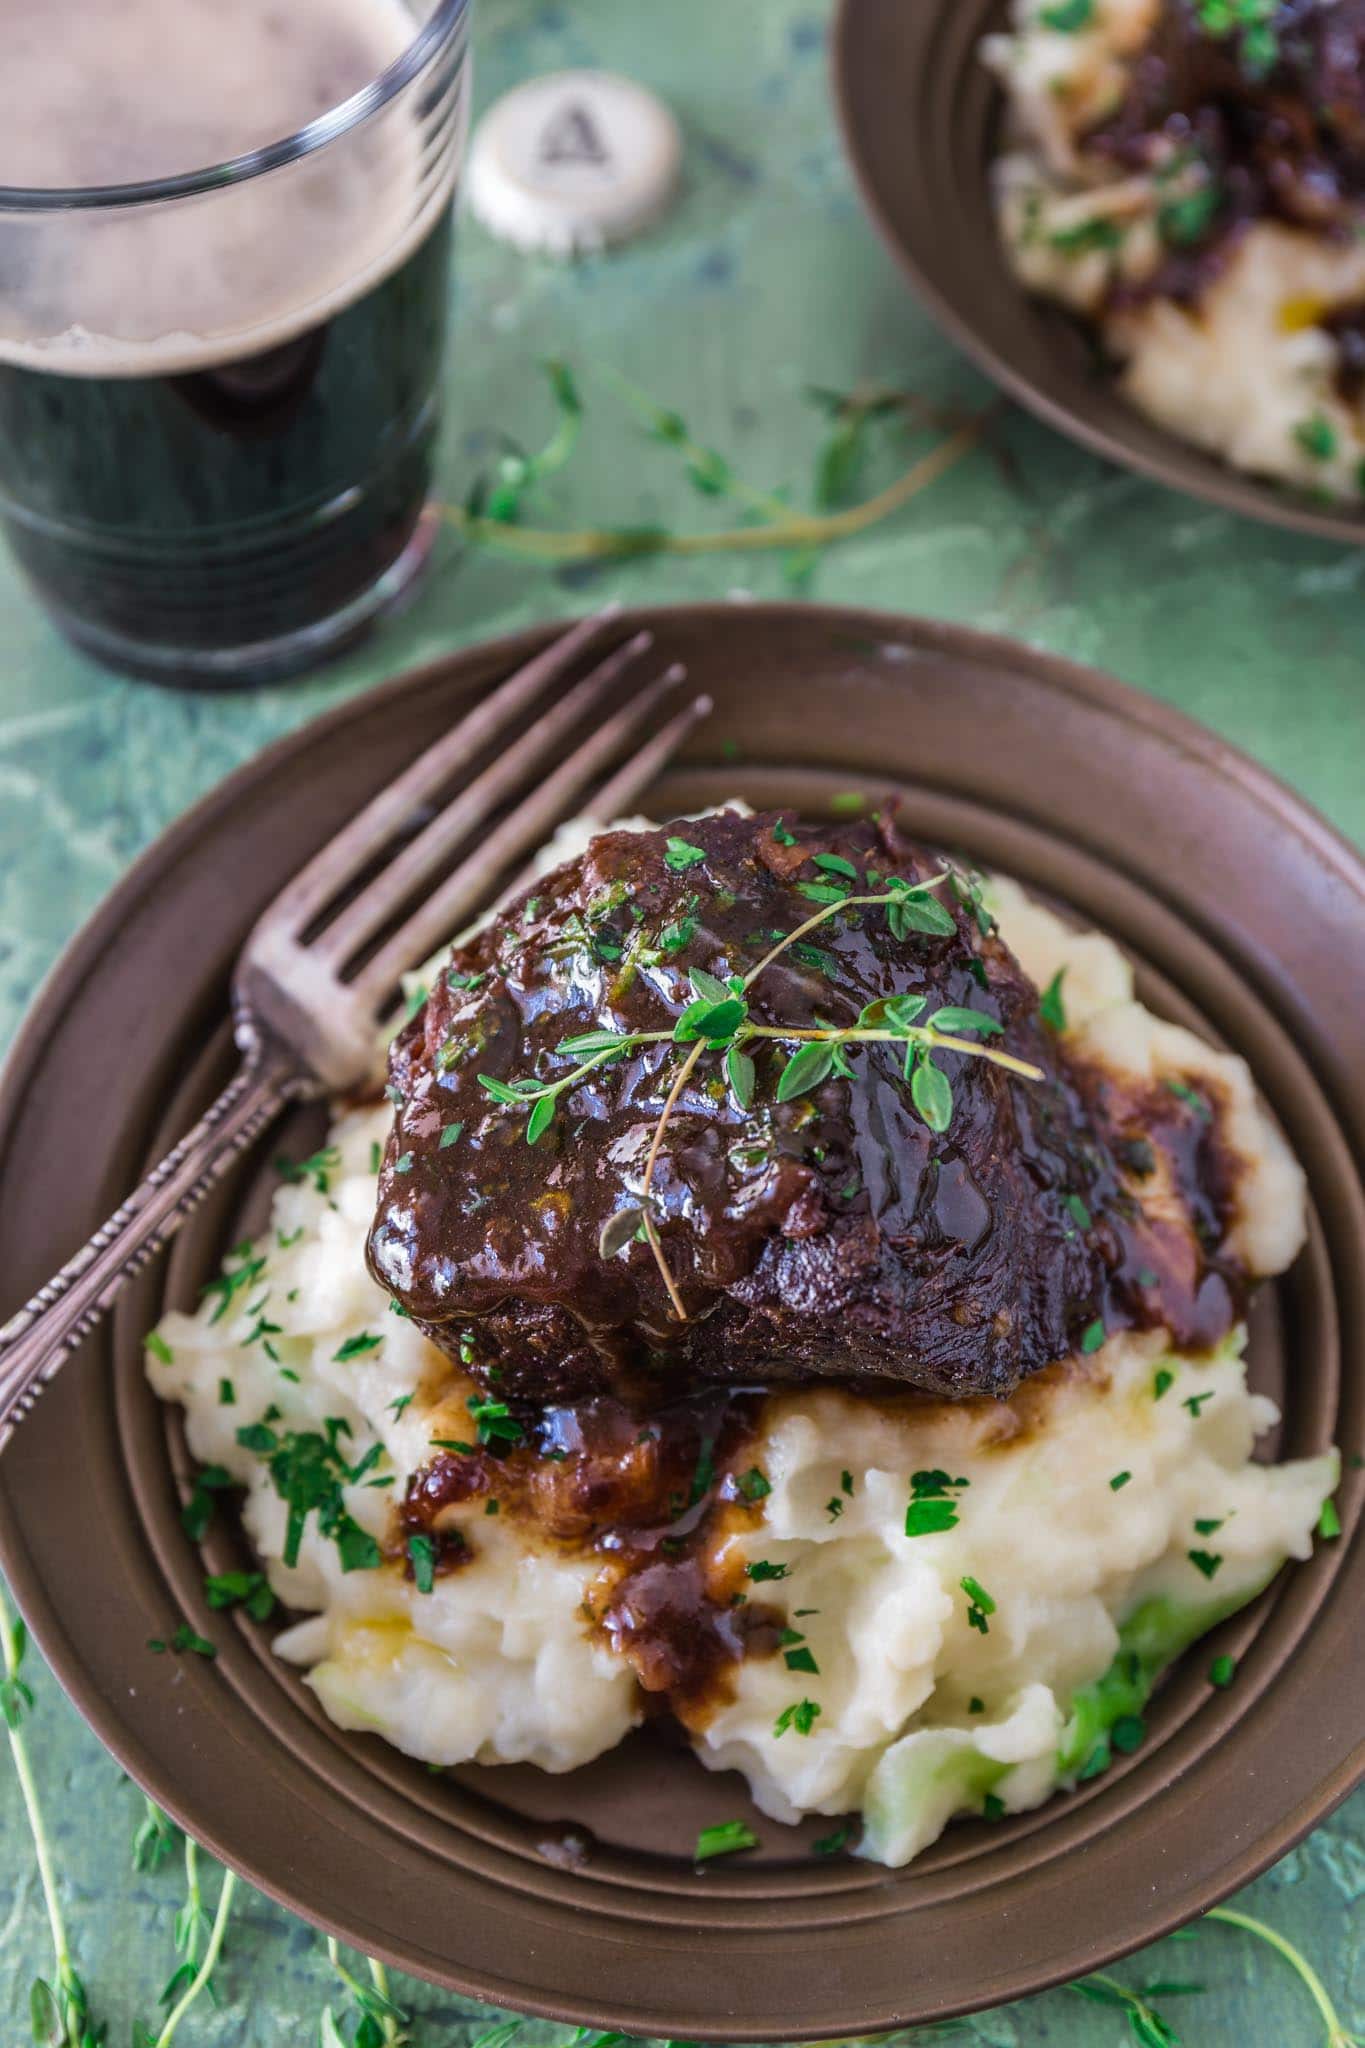 Stout Beer Braised Short Ribs | www.oliviascuisine.com | Celebrate St. Patrick's Day by cooking these Irish inspired Stout Beer Braised Short Ribs. Rich, hearty and incredibly fall-apart tender! Serve it over colcannon or with some Irish soda bread to soak up all that luscious beer gravy goodness. (Recipe and food photography by @oliviascuisine.)